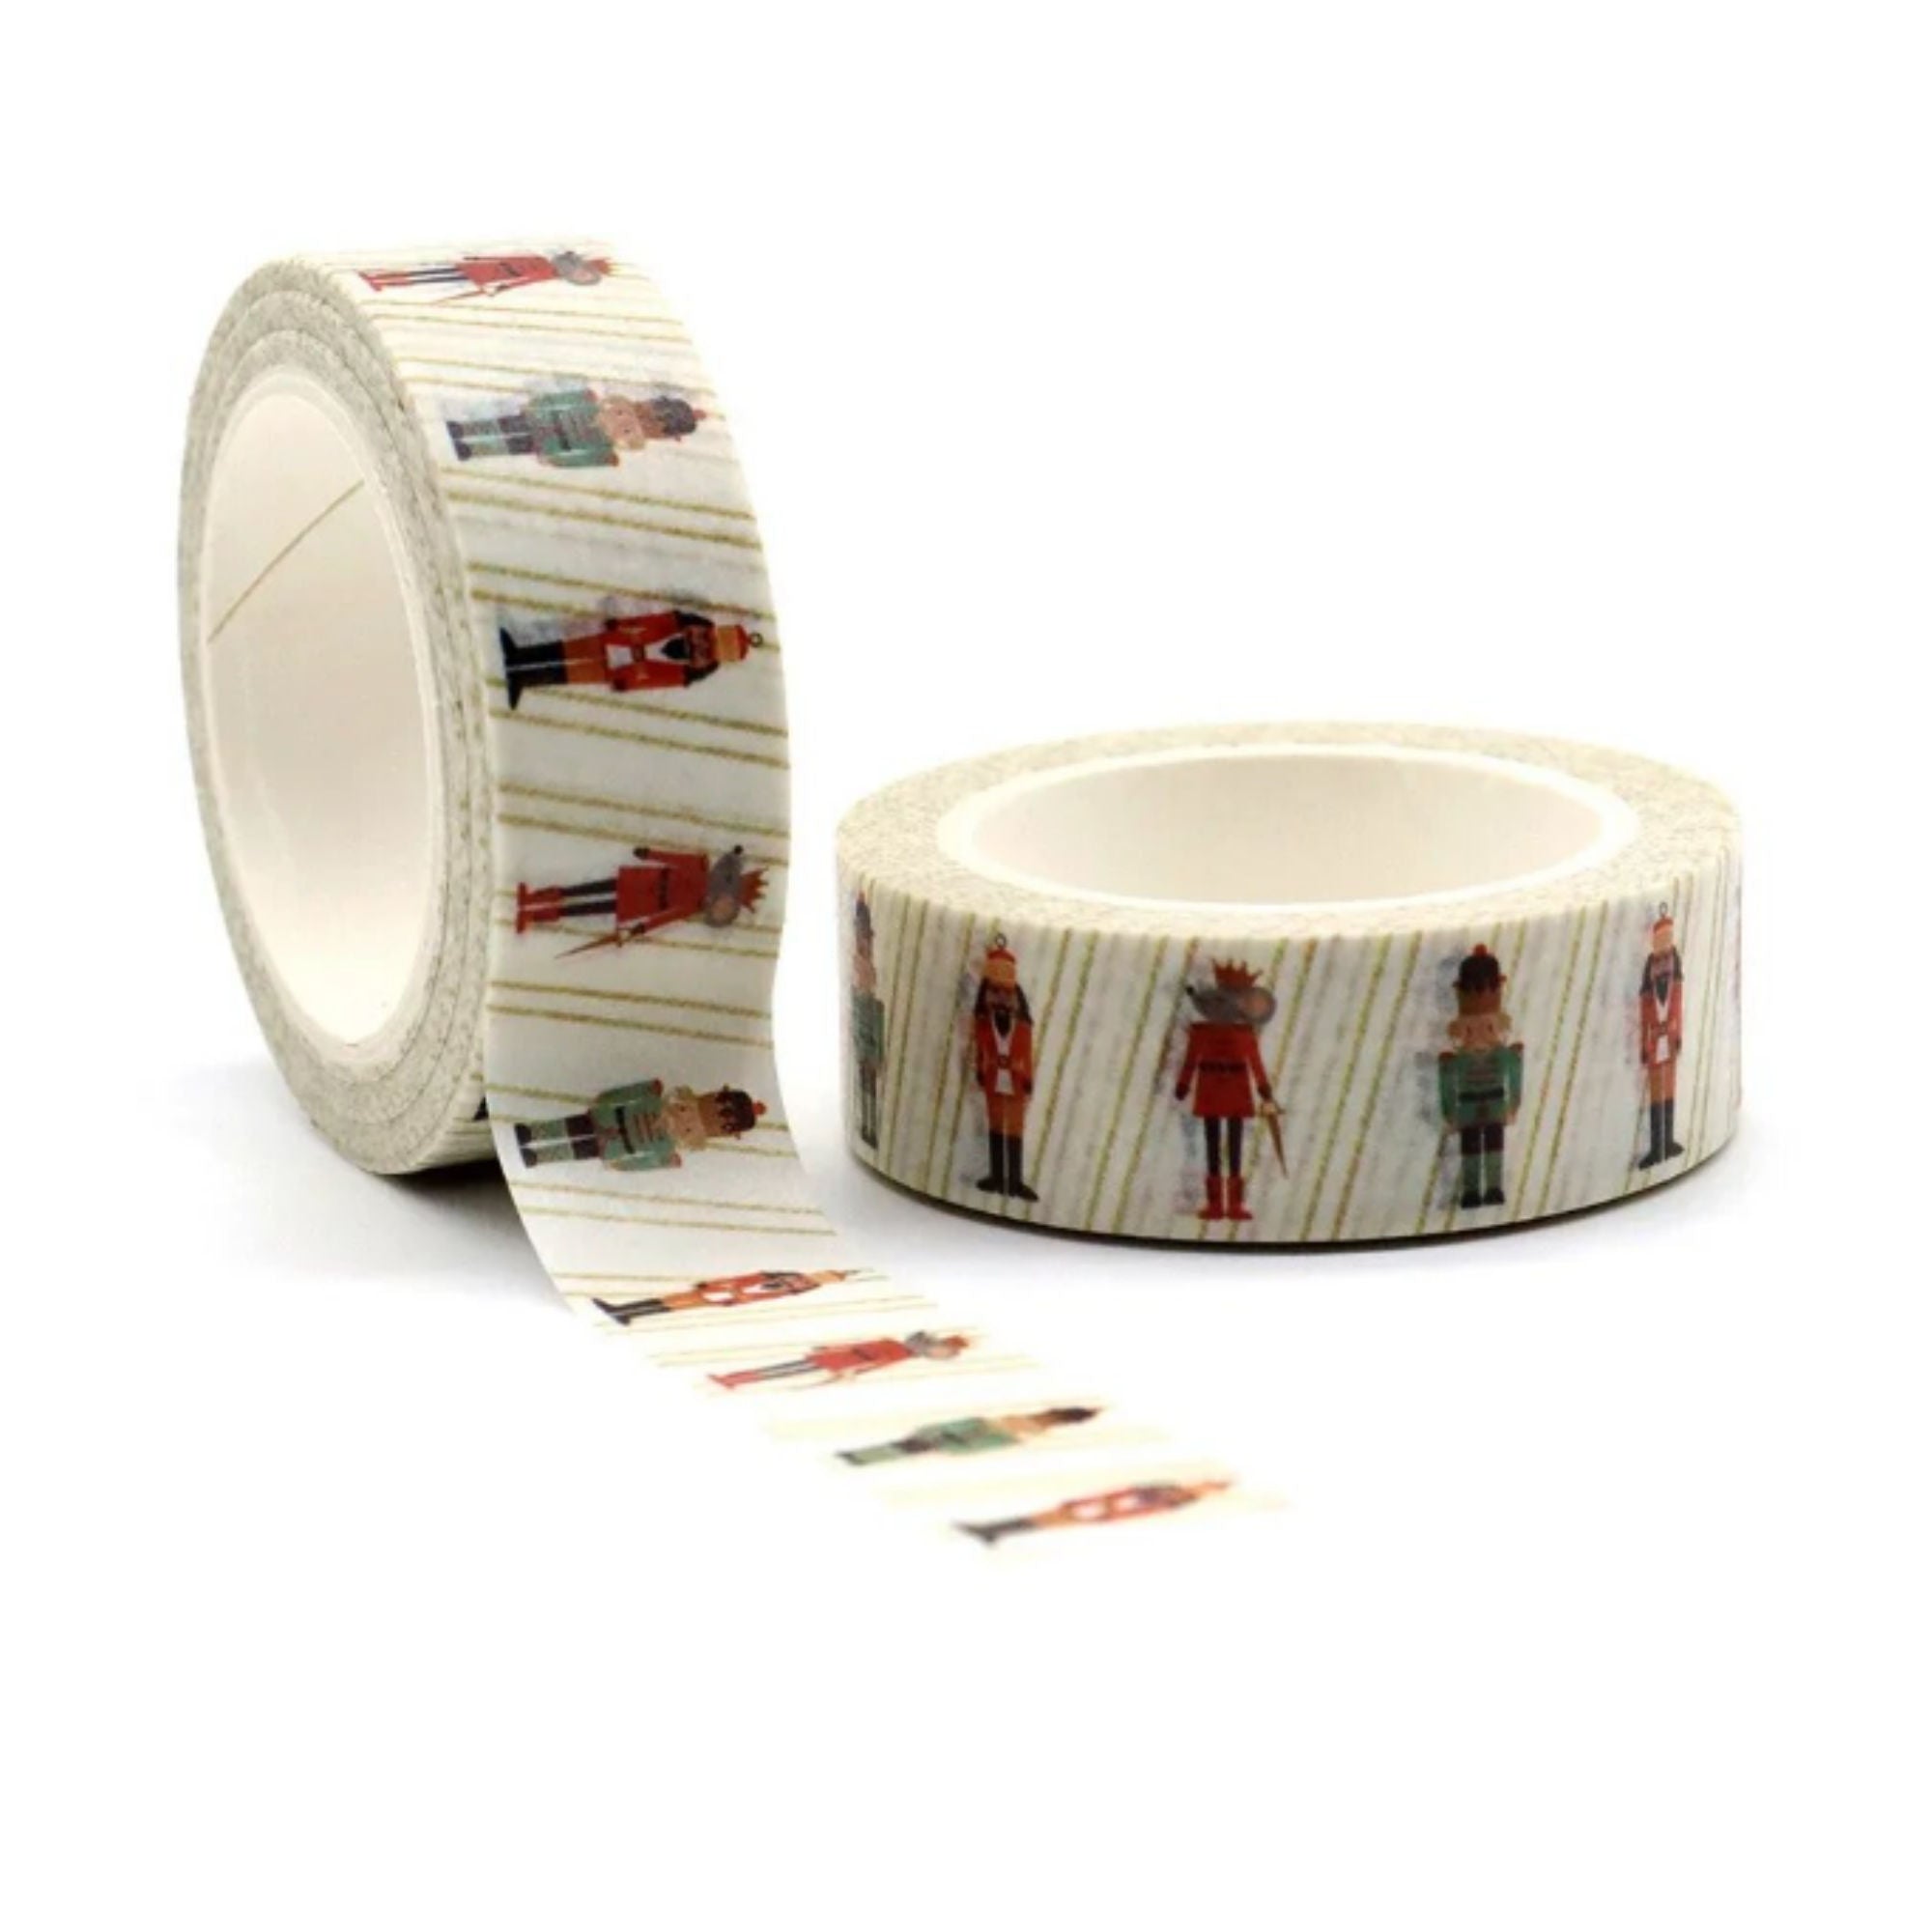 TW Collection Nutcracker Toy Soldier 15mm x 15 Feet Washi Tape by SSC Designs